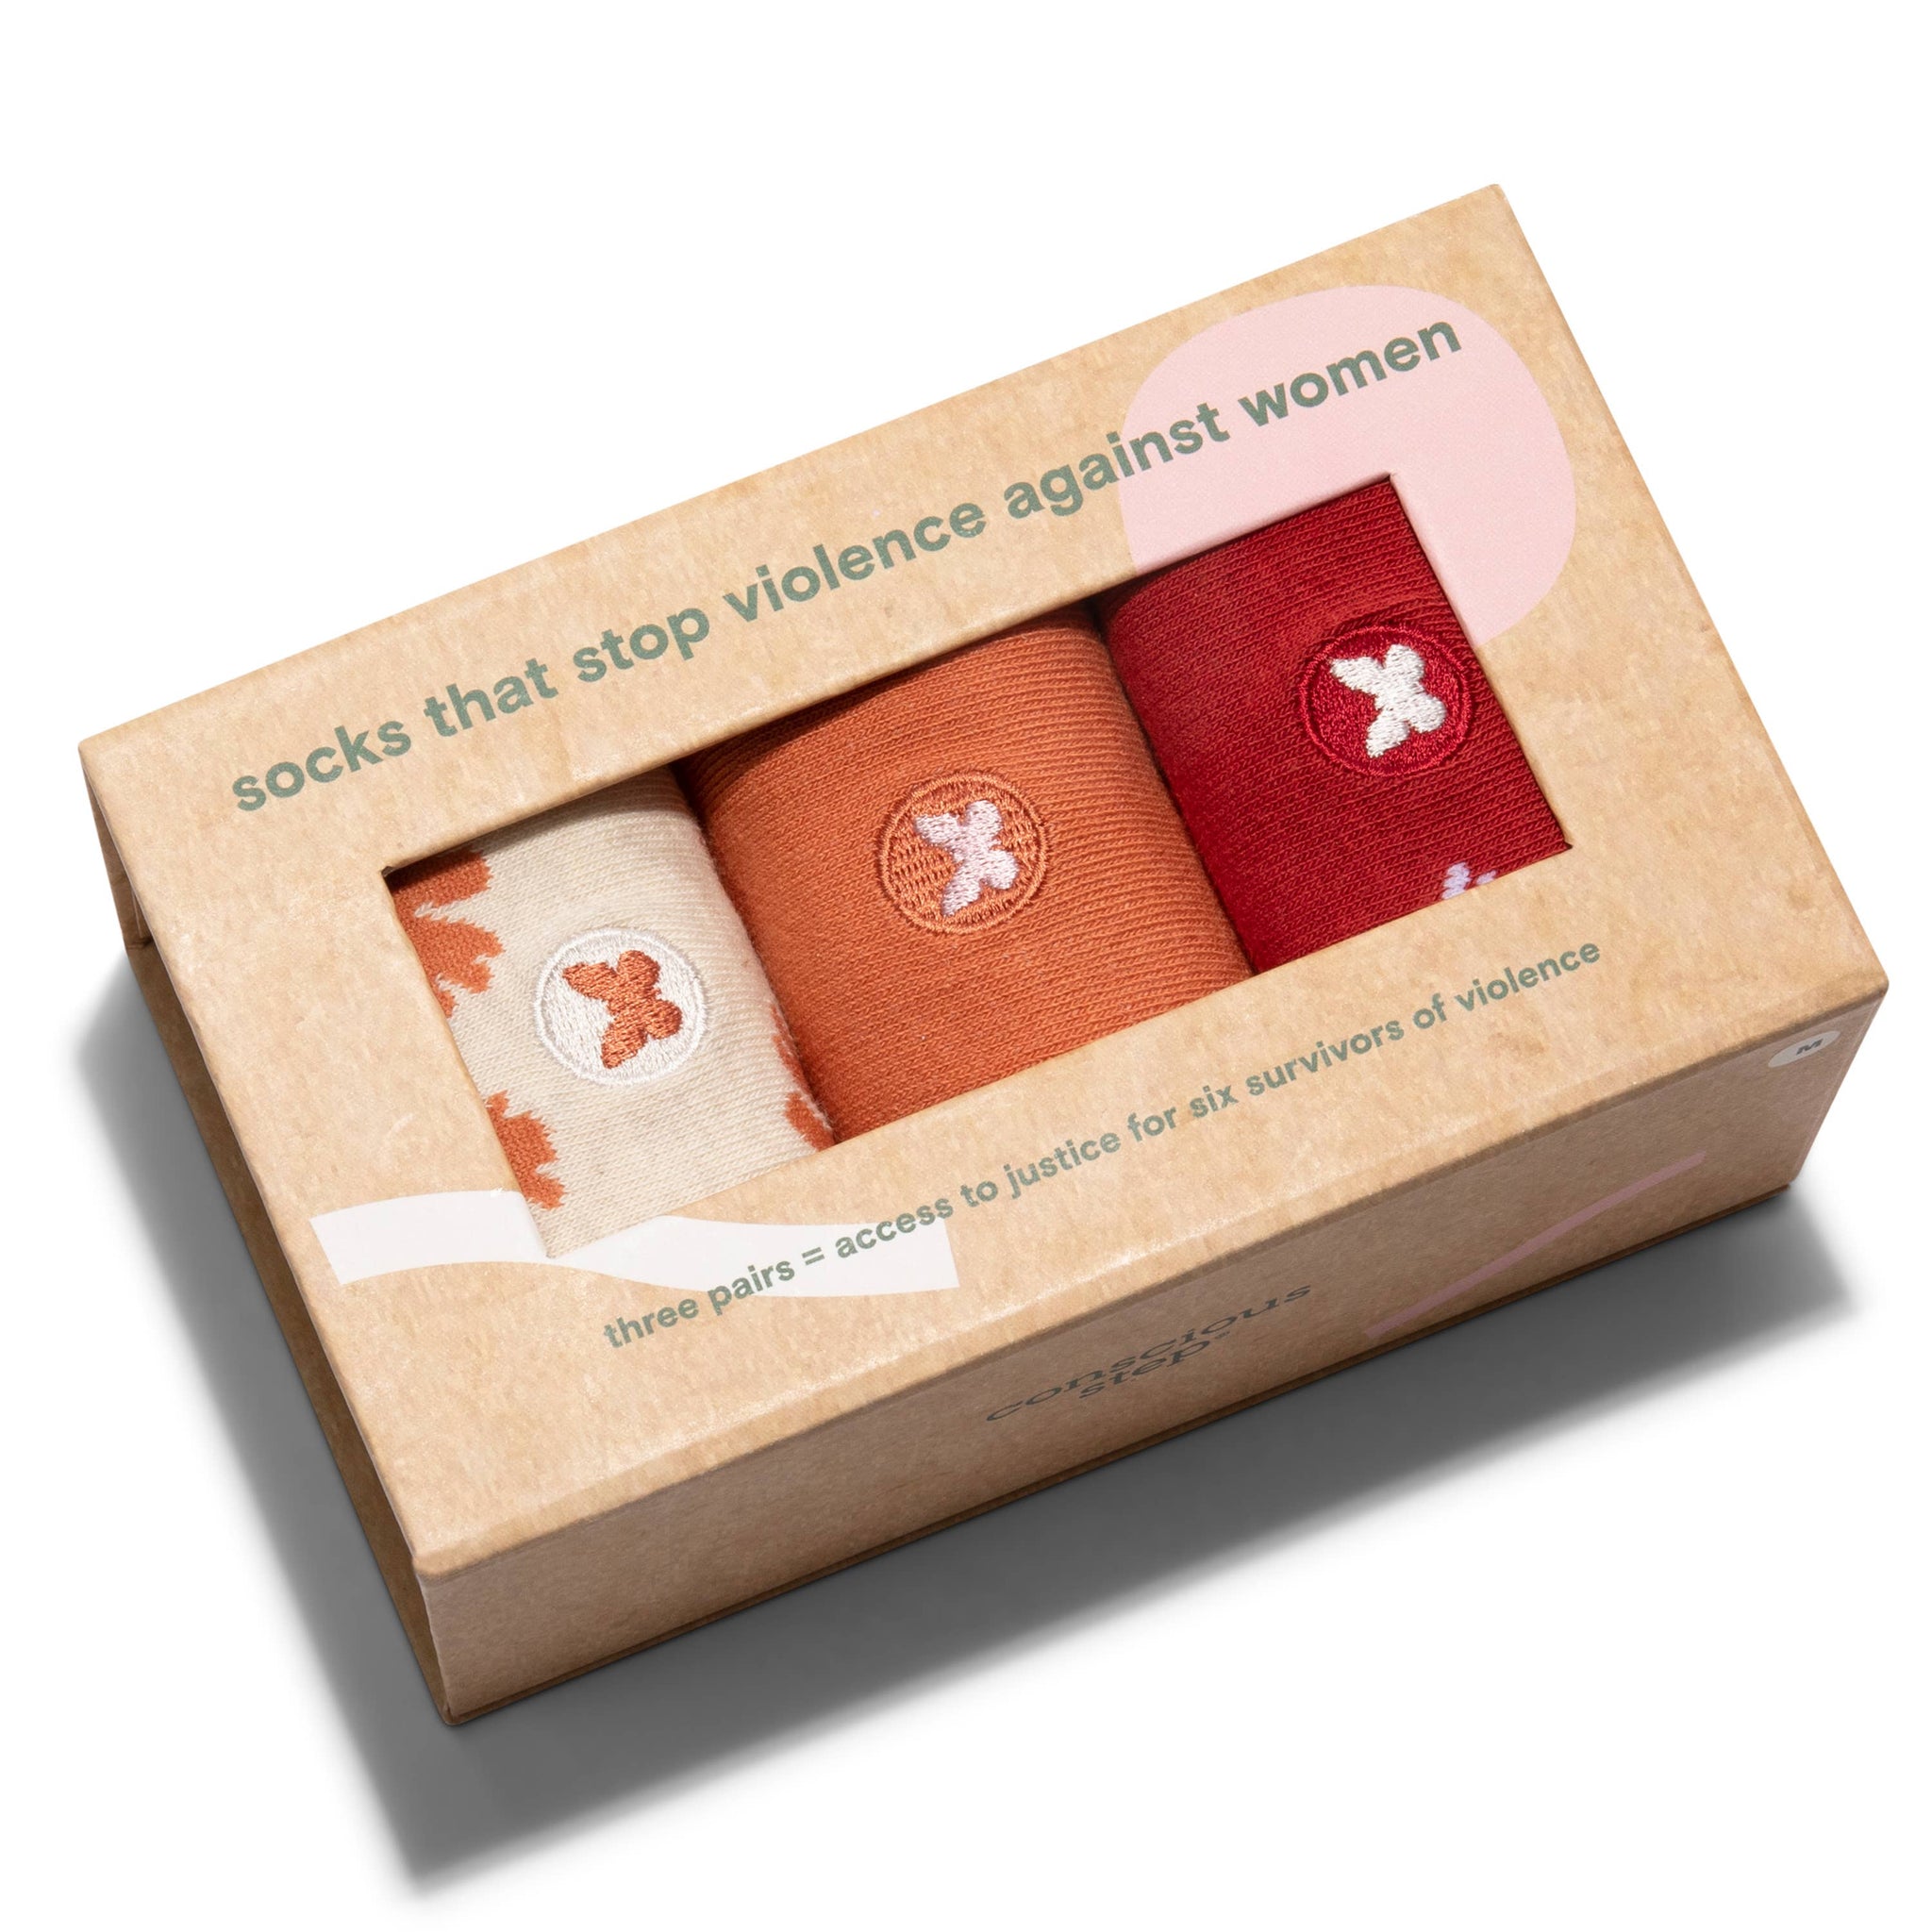 Boxed Set socks that stop violence against women (Small)